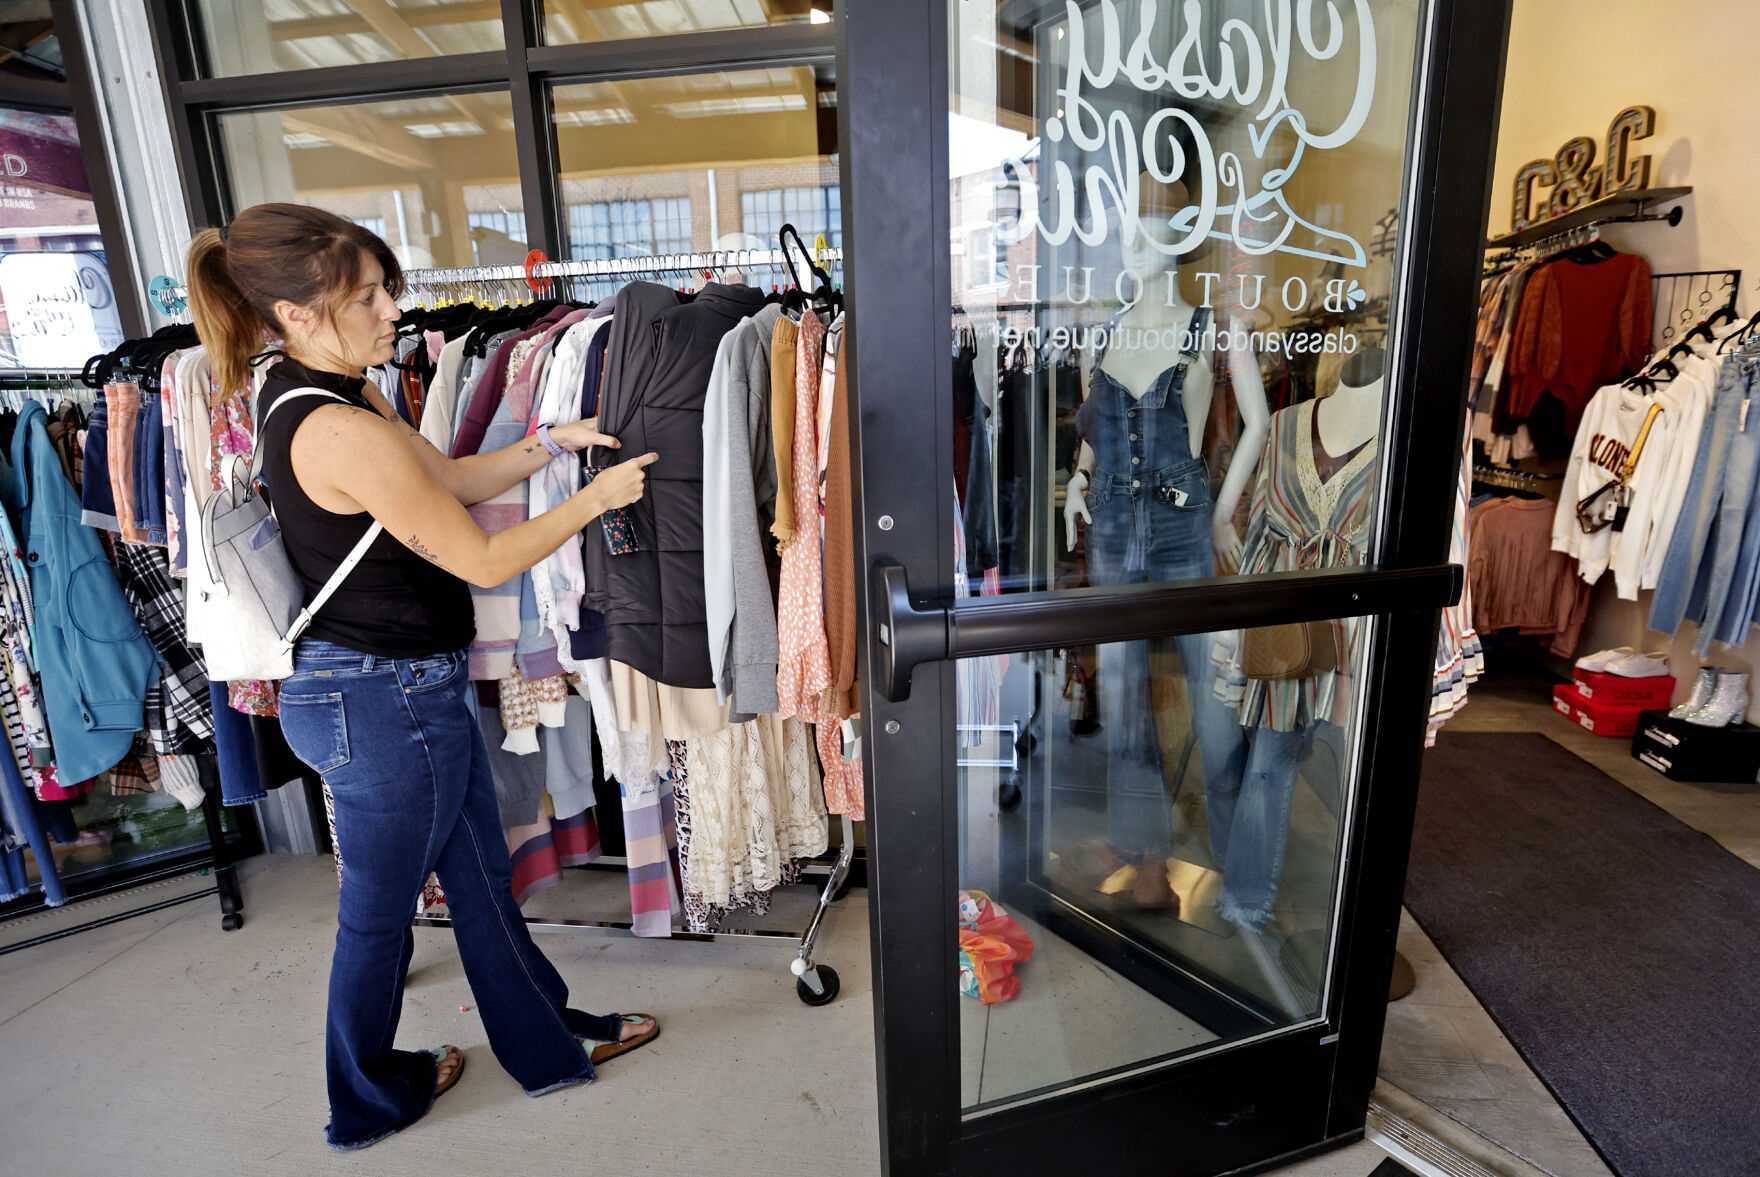 Abbie Bartels, of Bellevue, Iowa, browses clothing at Classy & Chic Boutique in Dubuque on Friday, Aug. 18, 2023.    PHOTO CREDIT: JESSICA REILLY